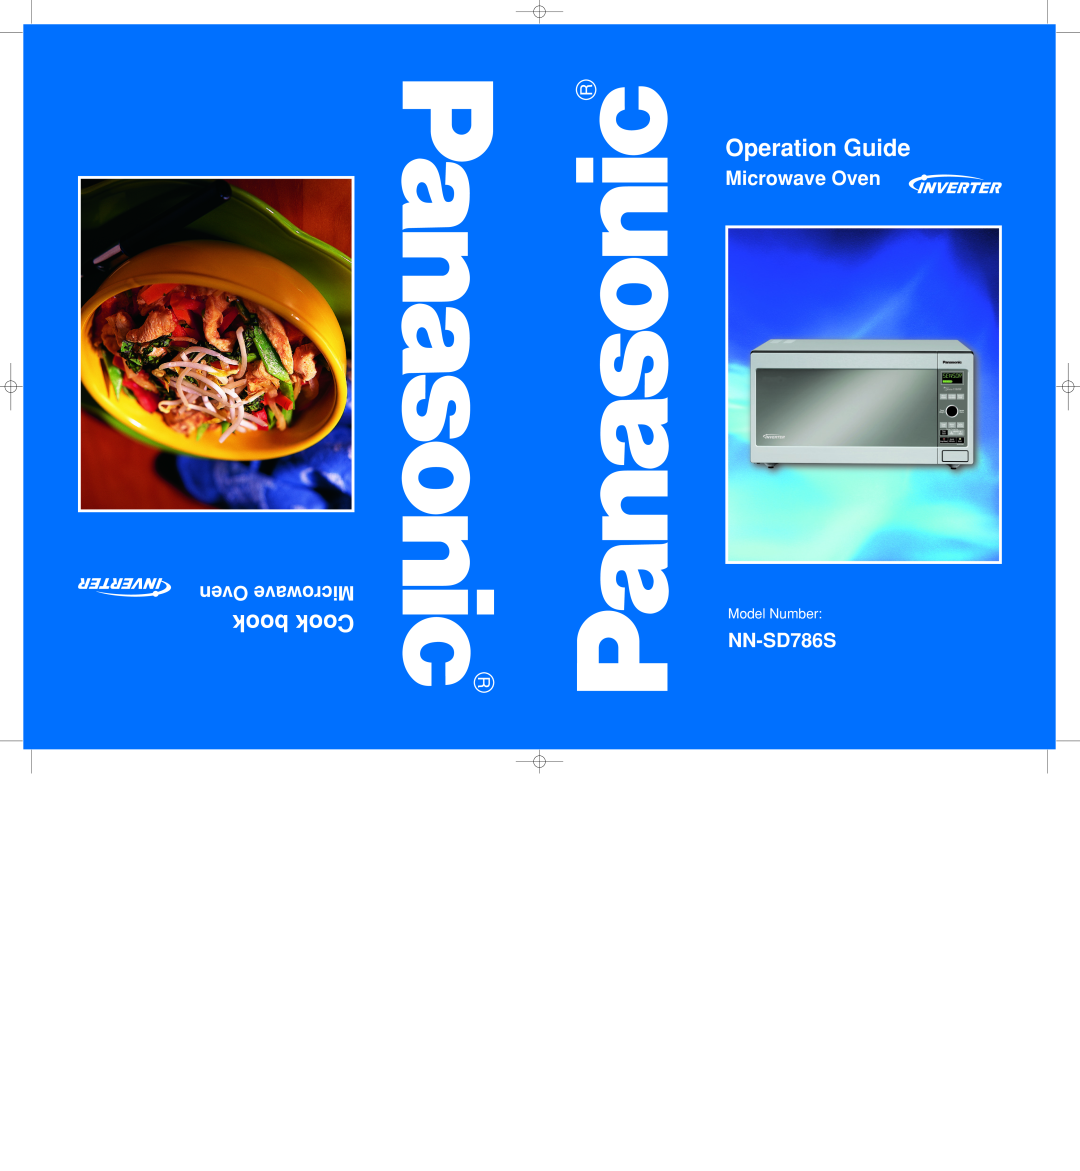 Panasonic NN-SD786S manual Operation Guide, book Cook, Microwave Oven, Oven Microwave, Model Number 